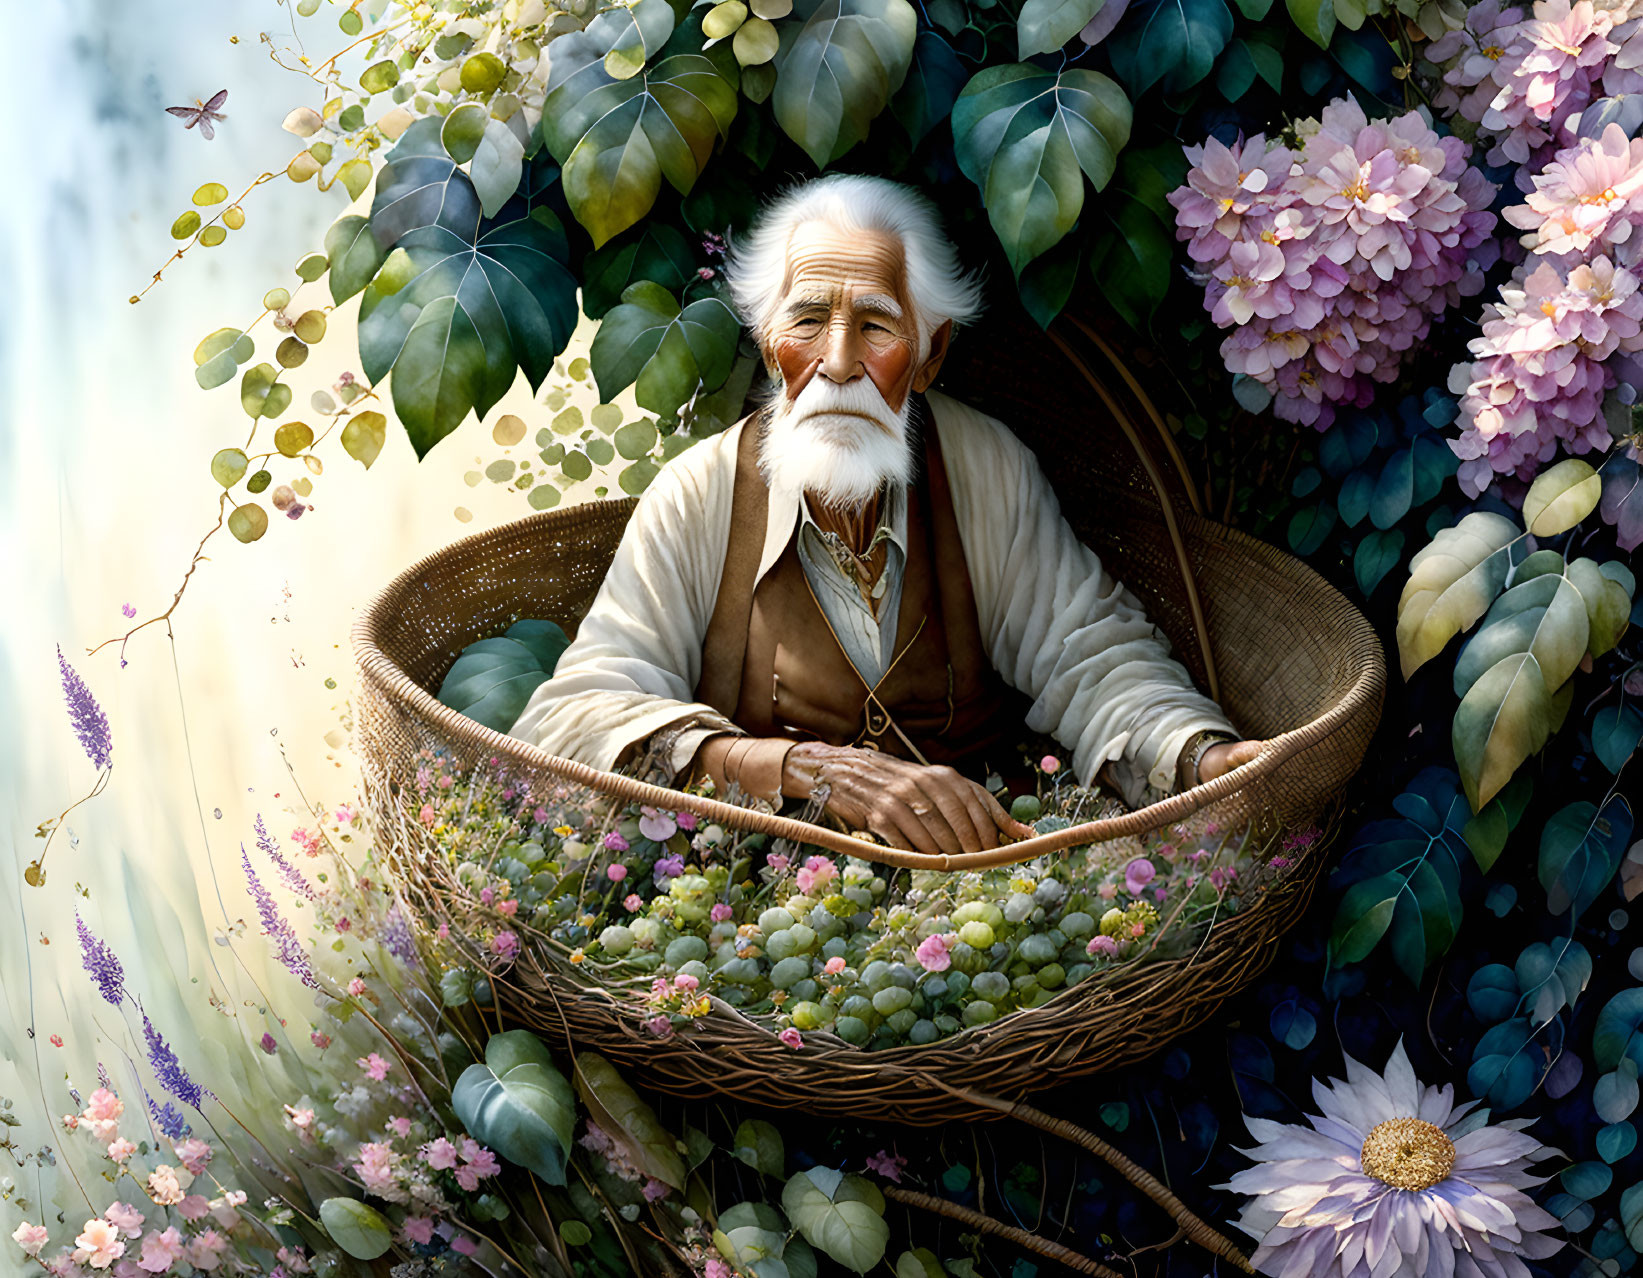 Old man in a woven reed basket cradled in a thicke